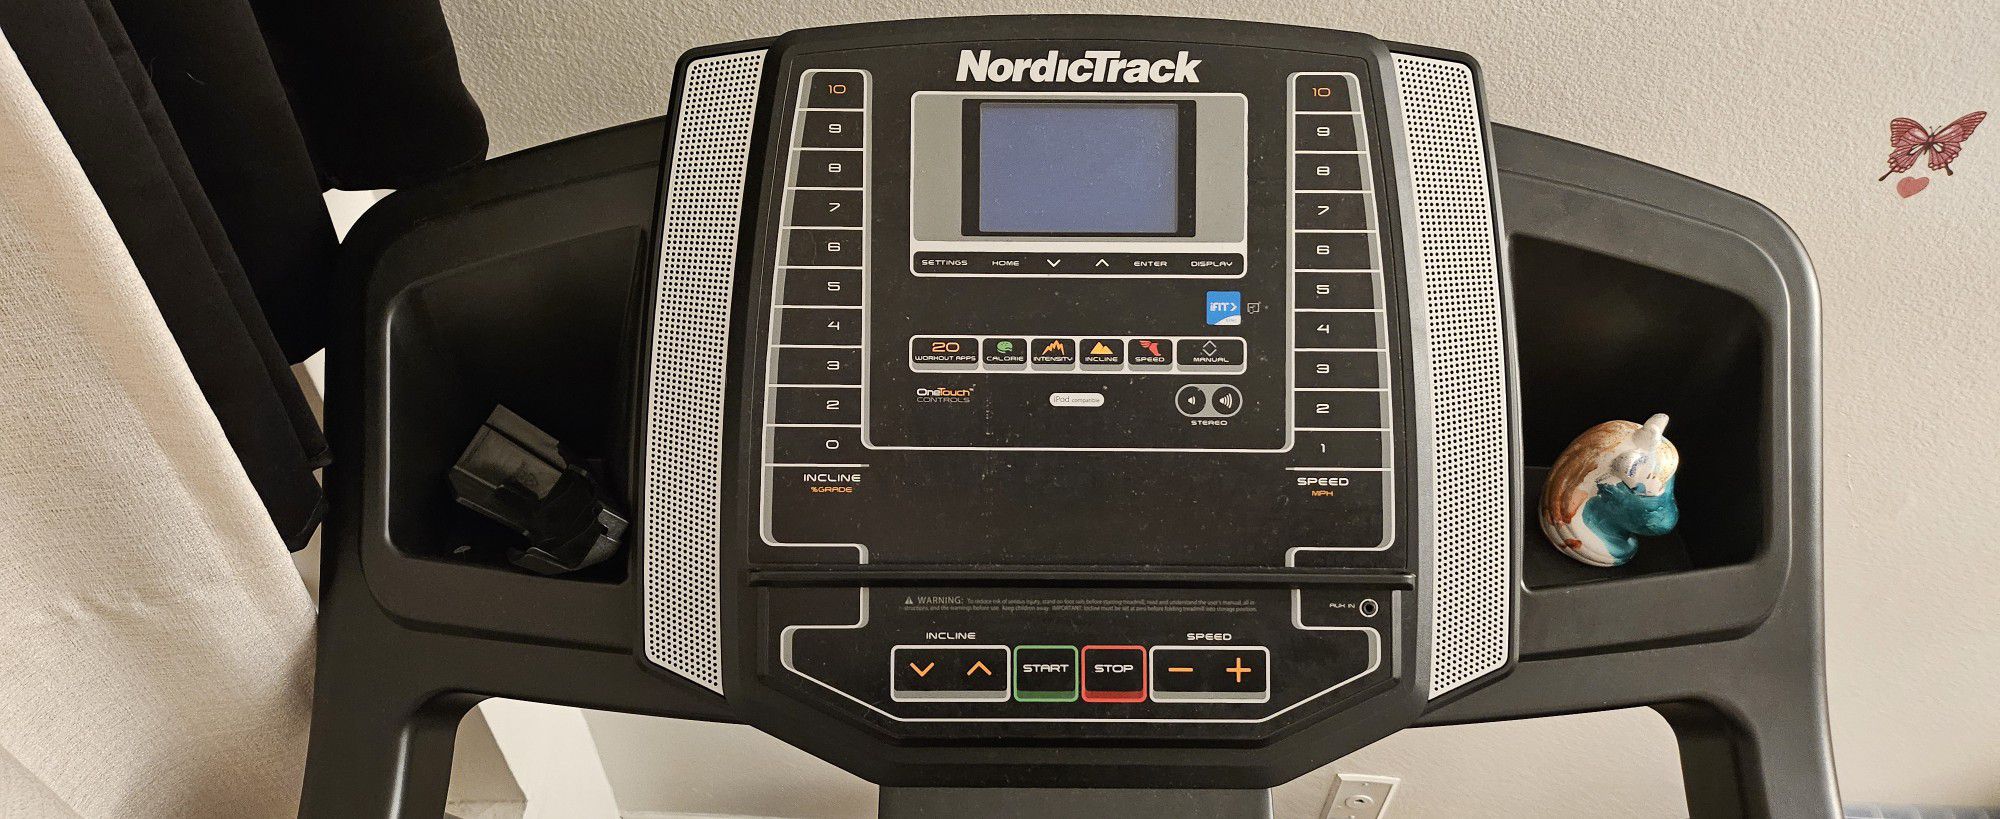 NordicTrack T Series: Perfect Treadmills for Home Use, Walking Treadmill with Incline, Bluetooth Enabled, 300 lbs User Capacity
